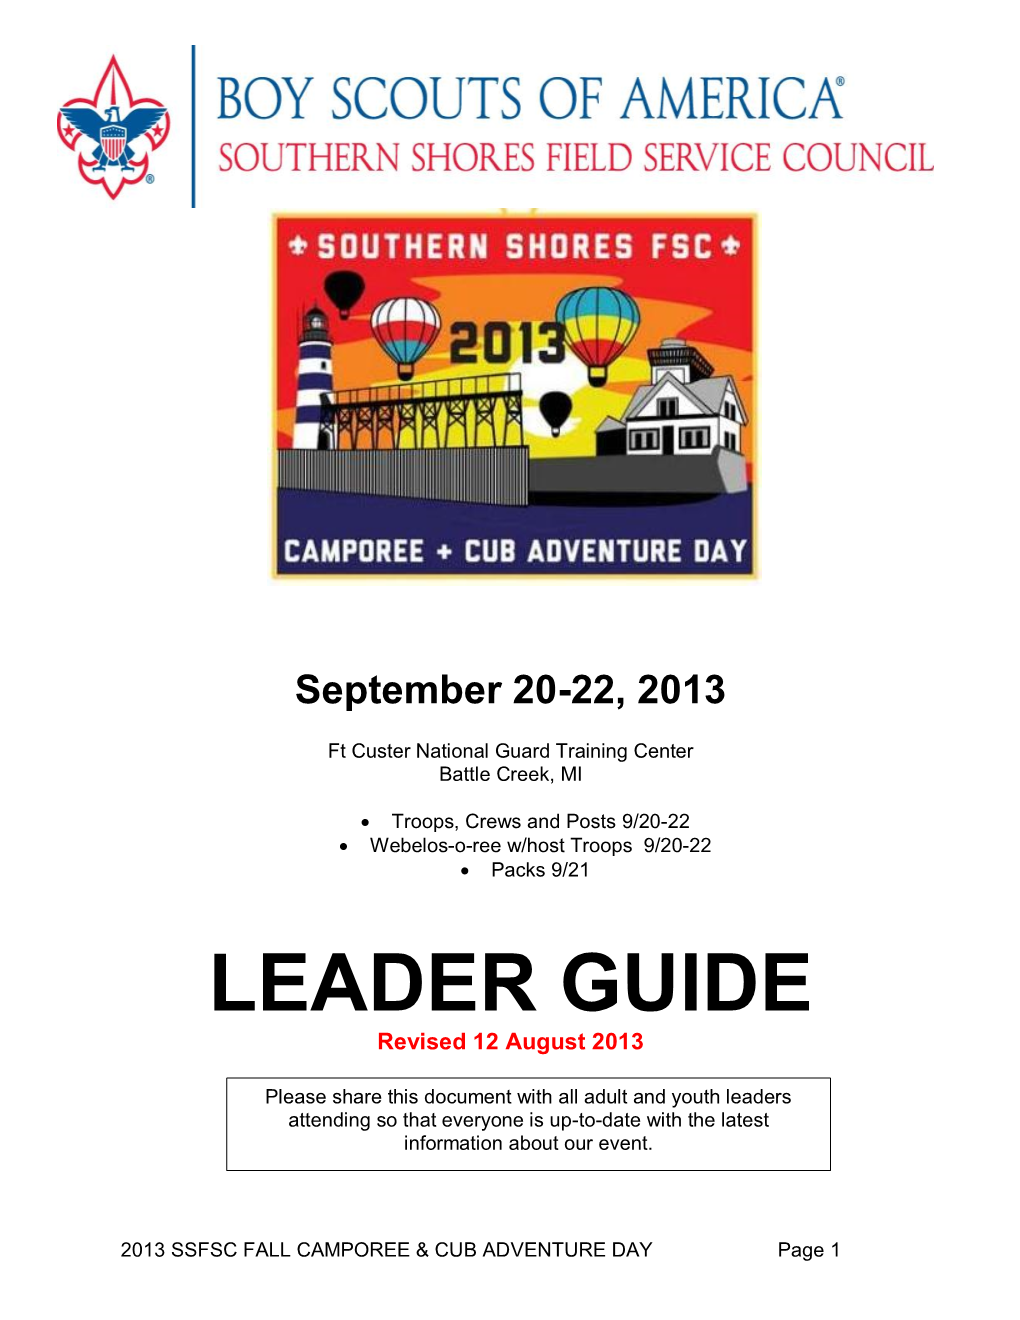 LEADER GUIDE Revised 12 August 2013